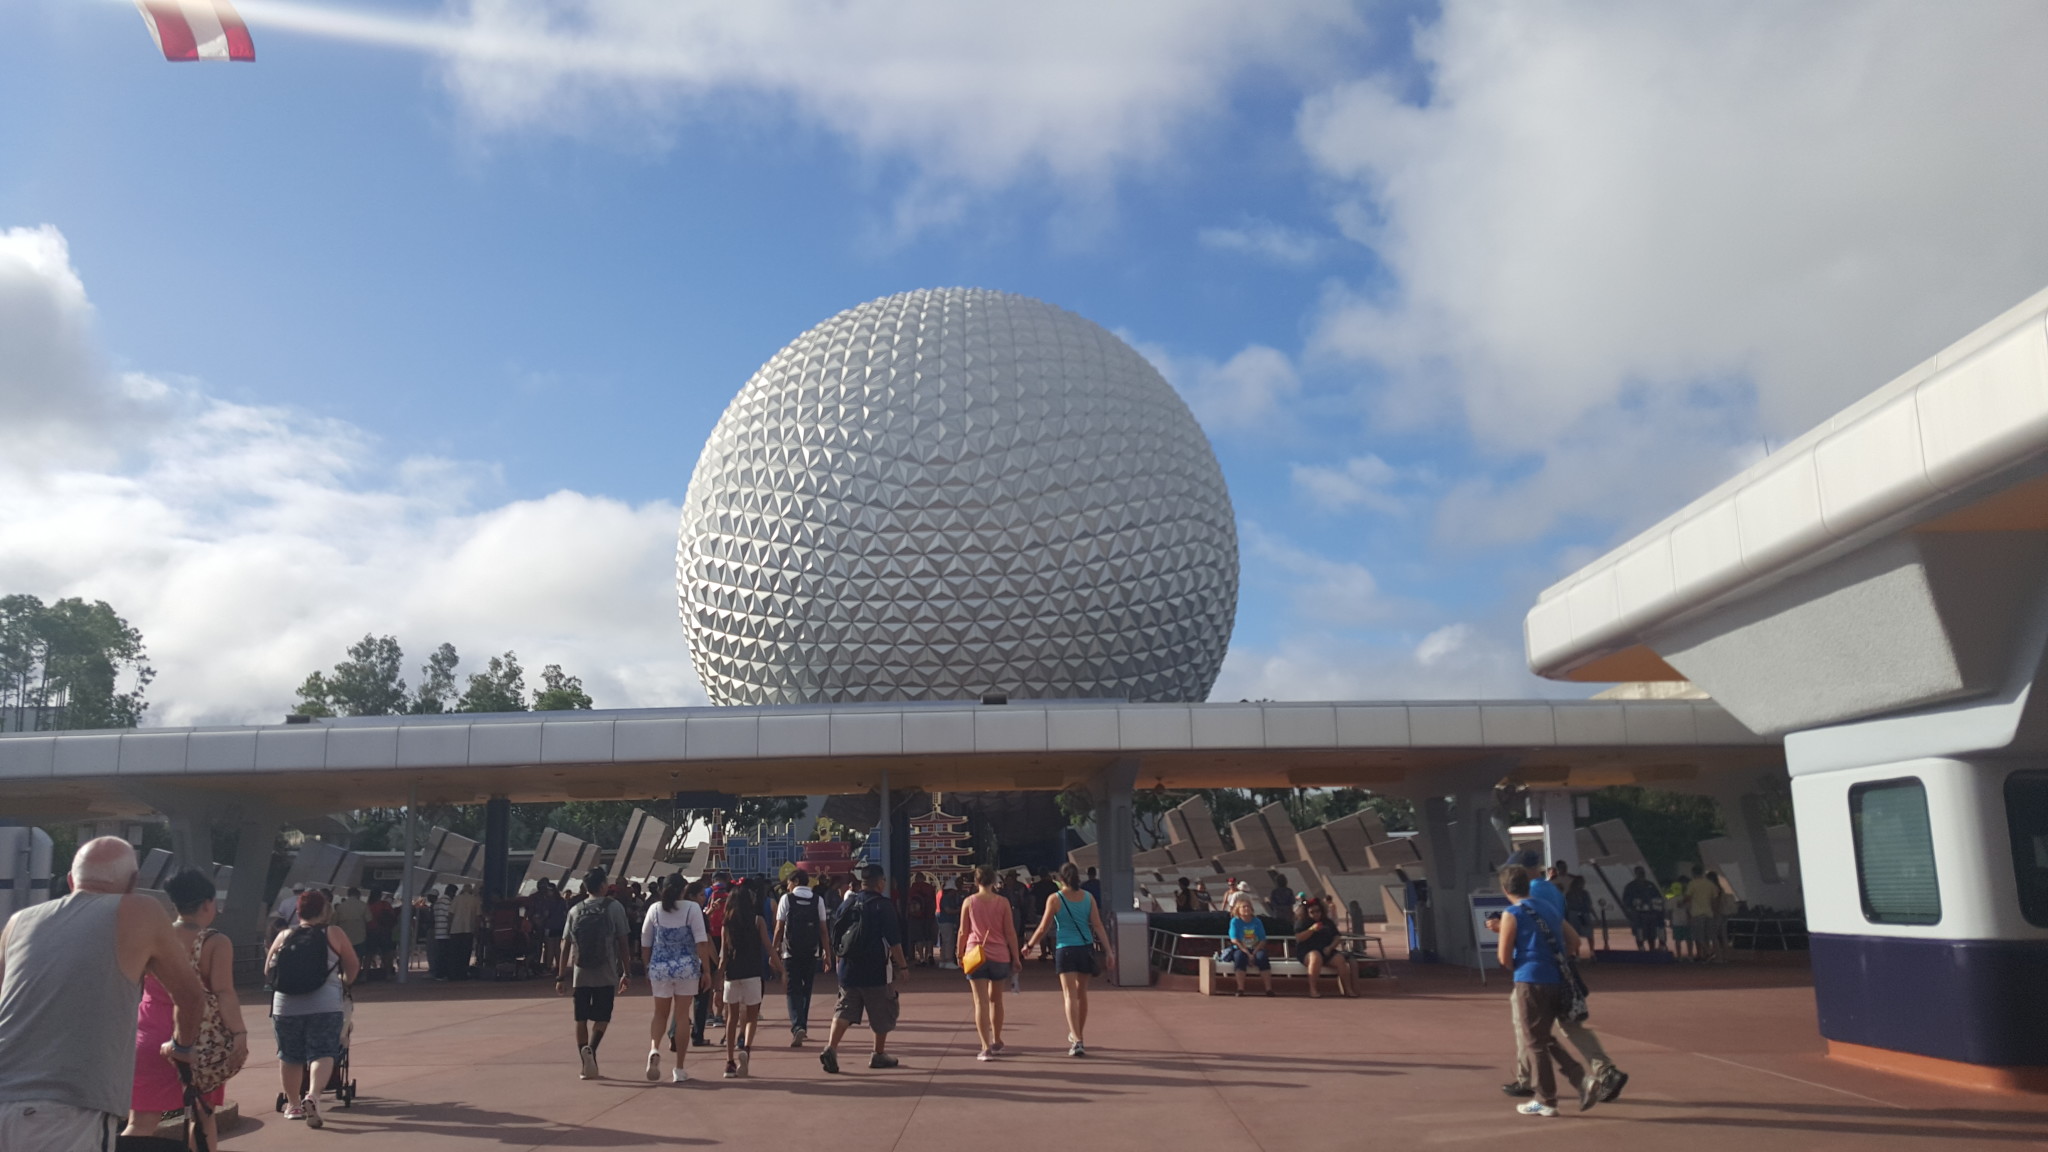 Are new security measures coming to Walt Disney World?